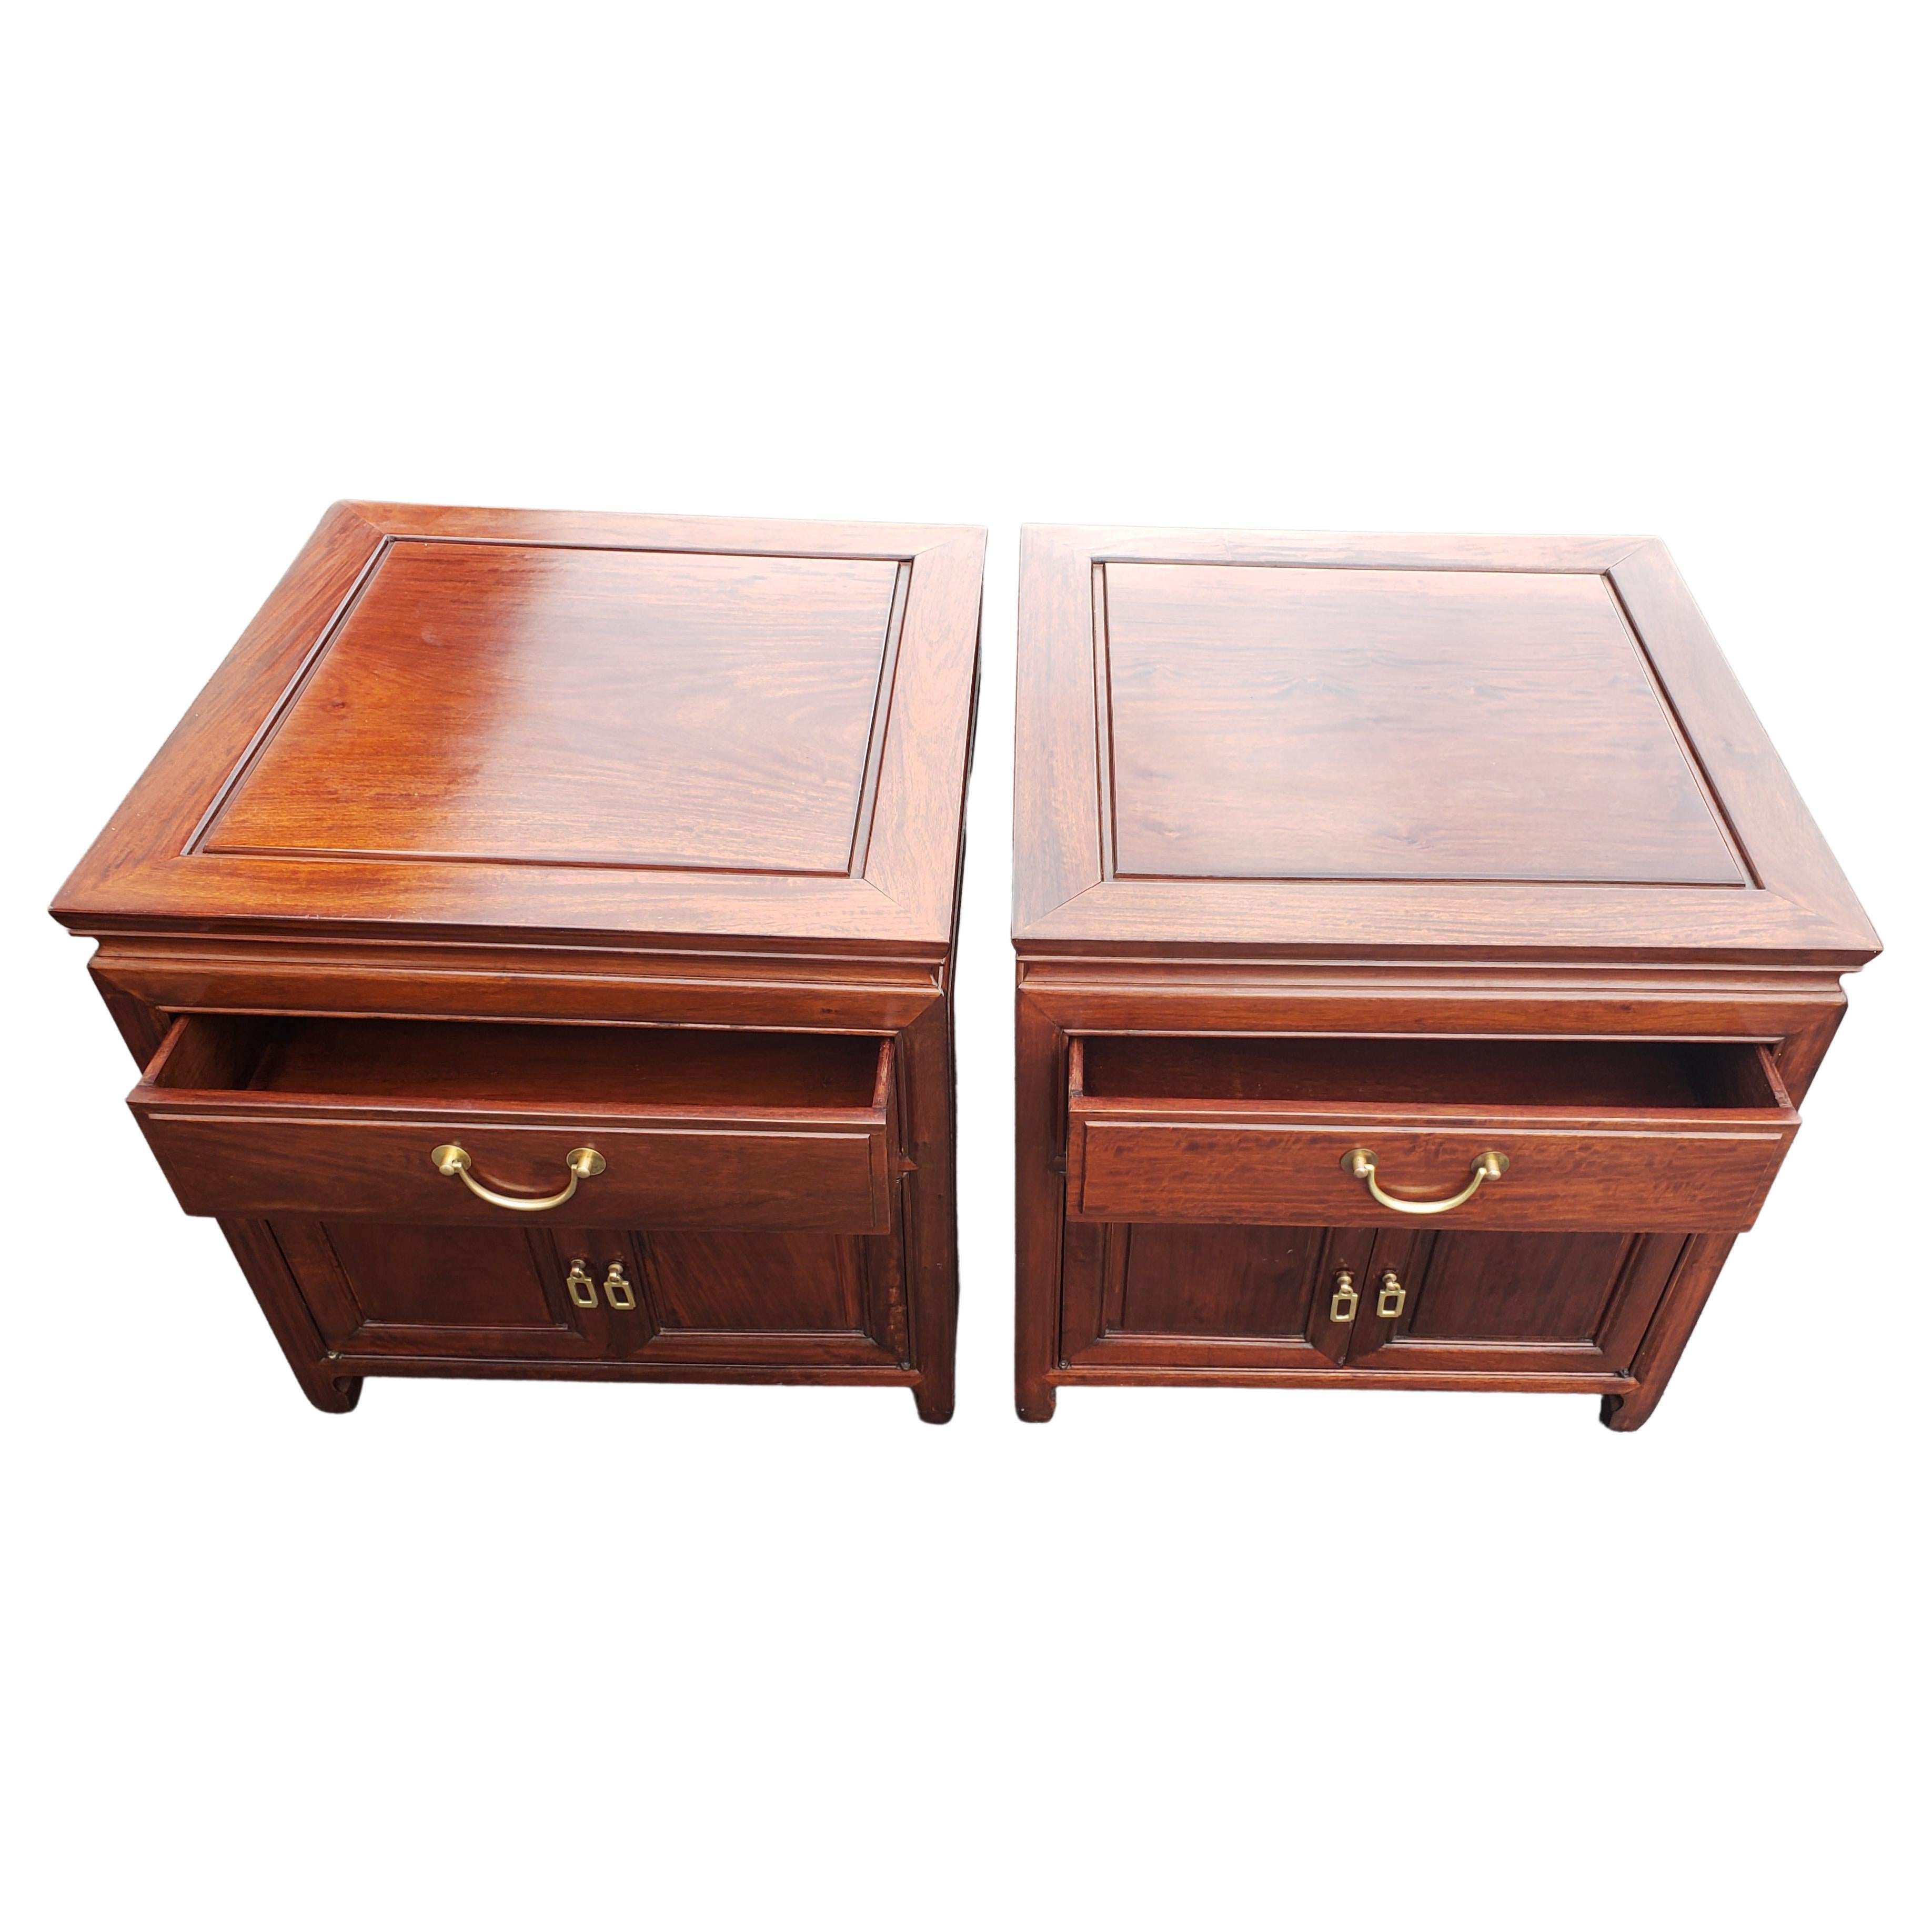 George Zee Asian American Rosewood Chippendale Side Tables, circa 1960s, a Pair In Good Condition For Sale In Germantown, MD